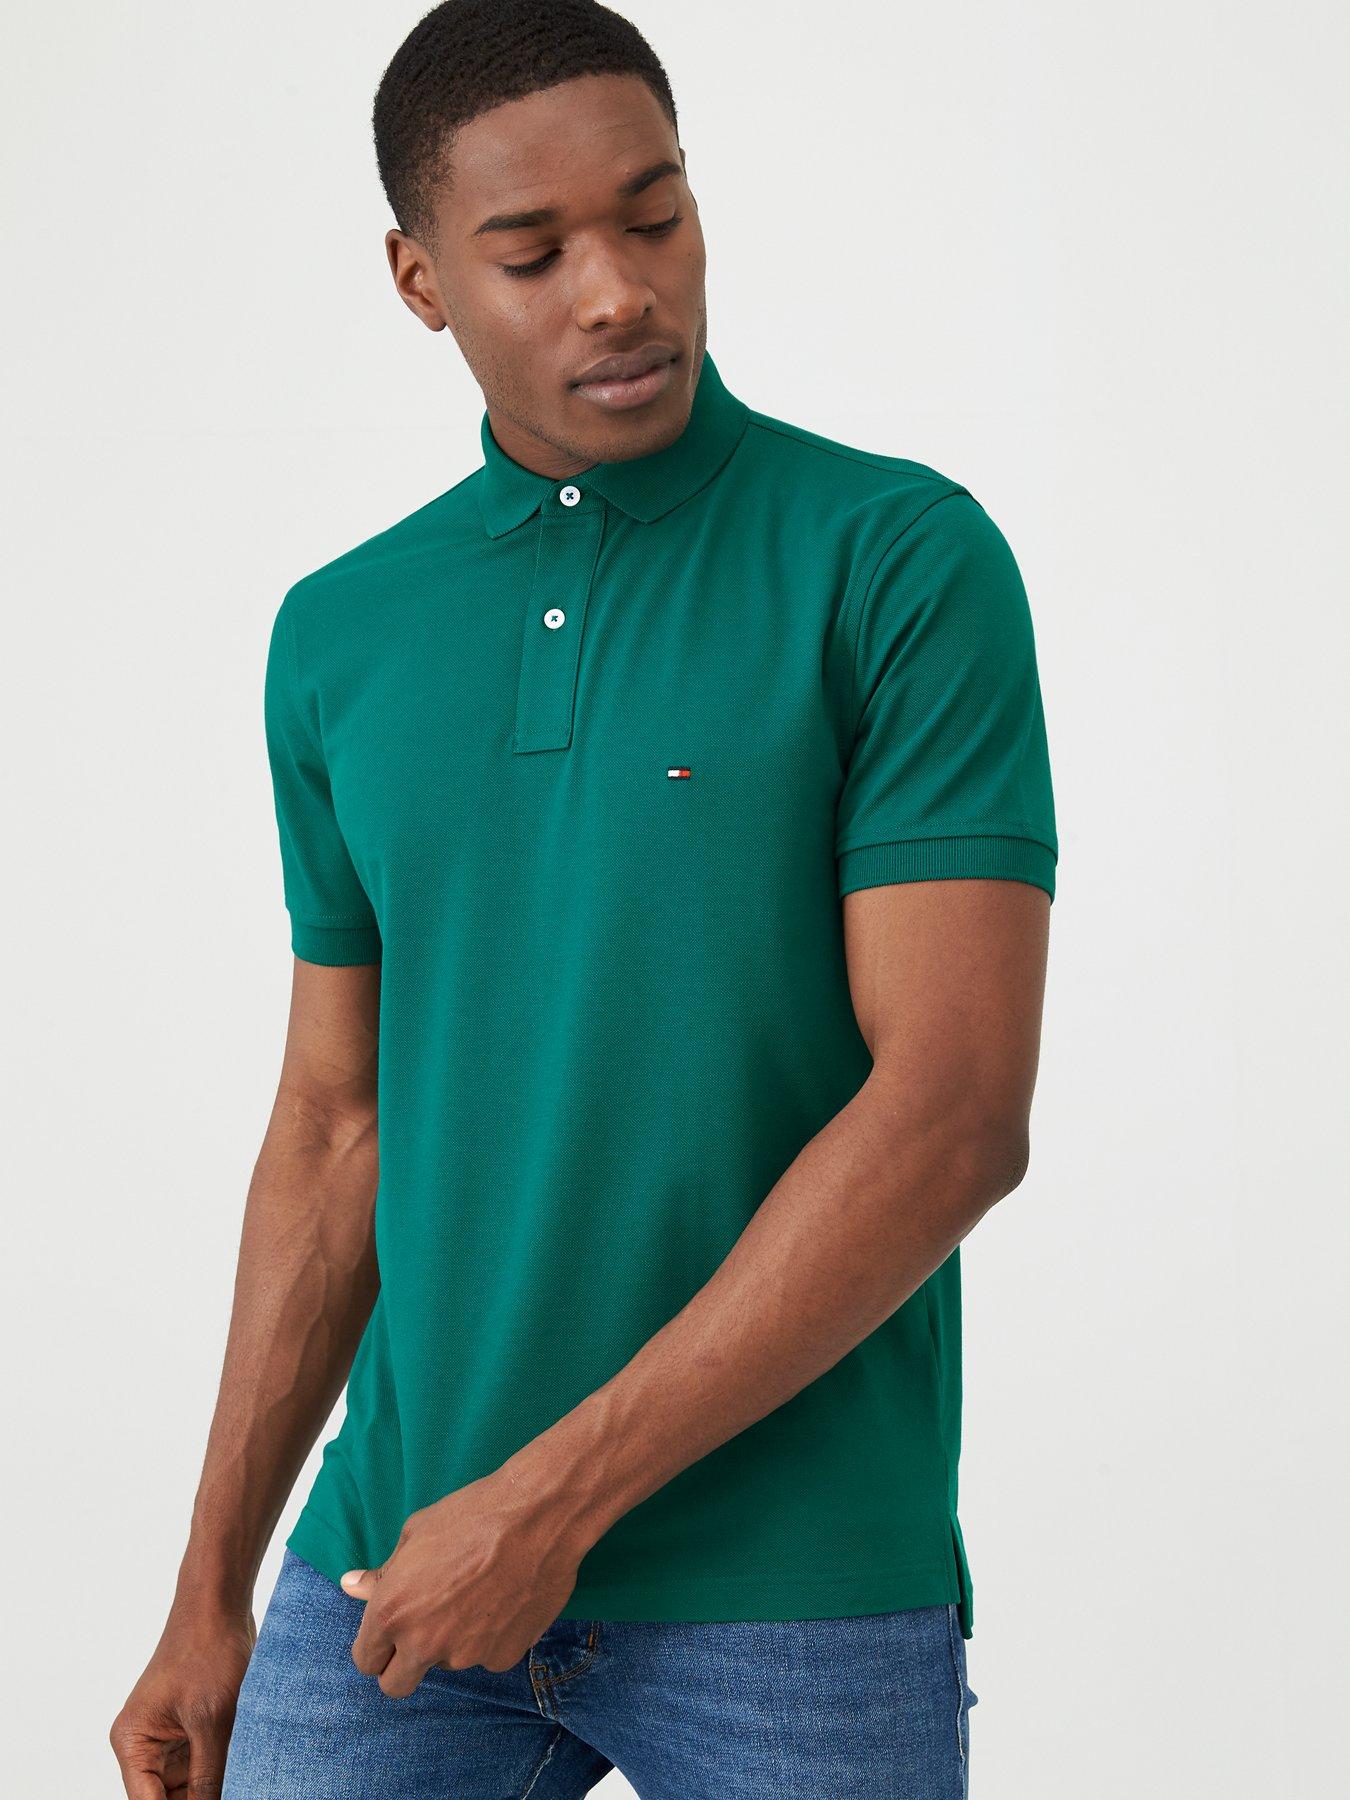 tommy jeans green shirt